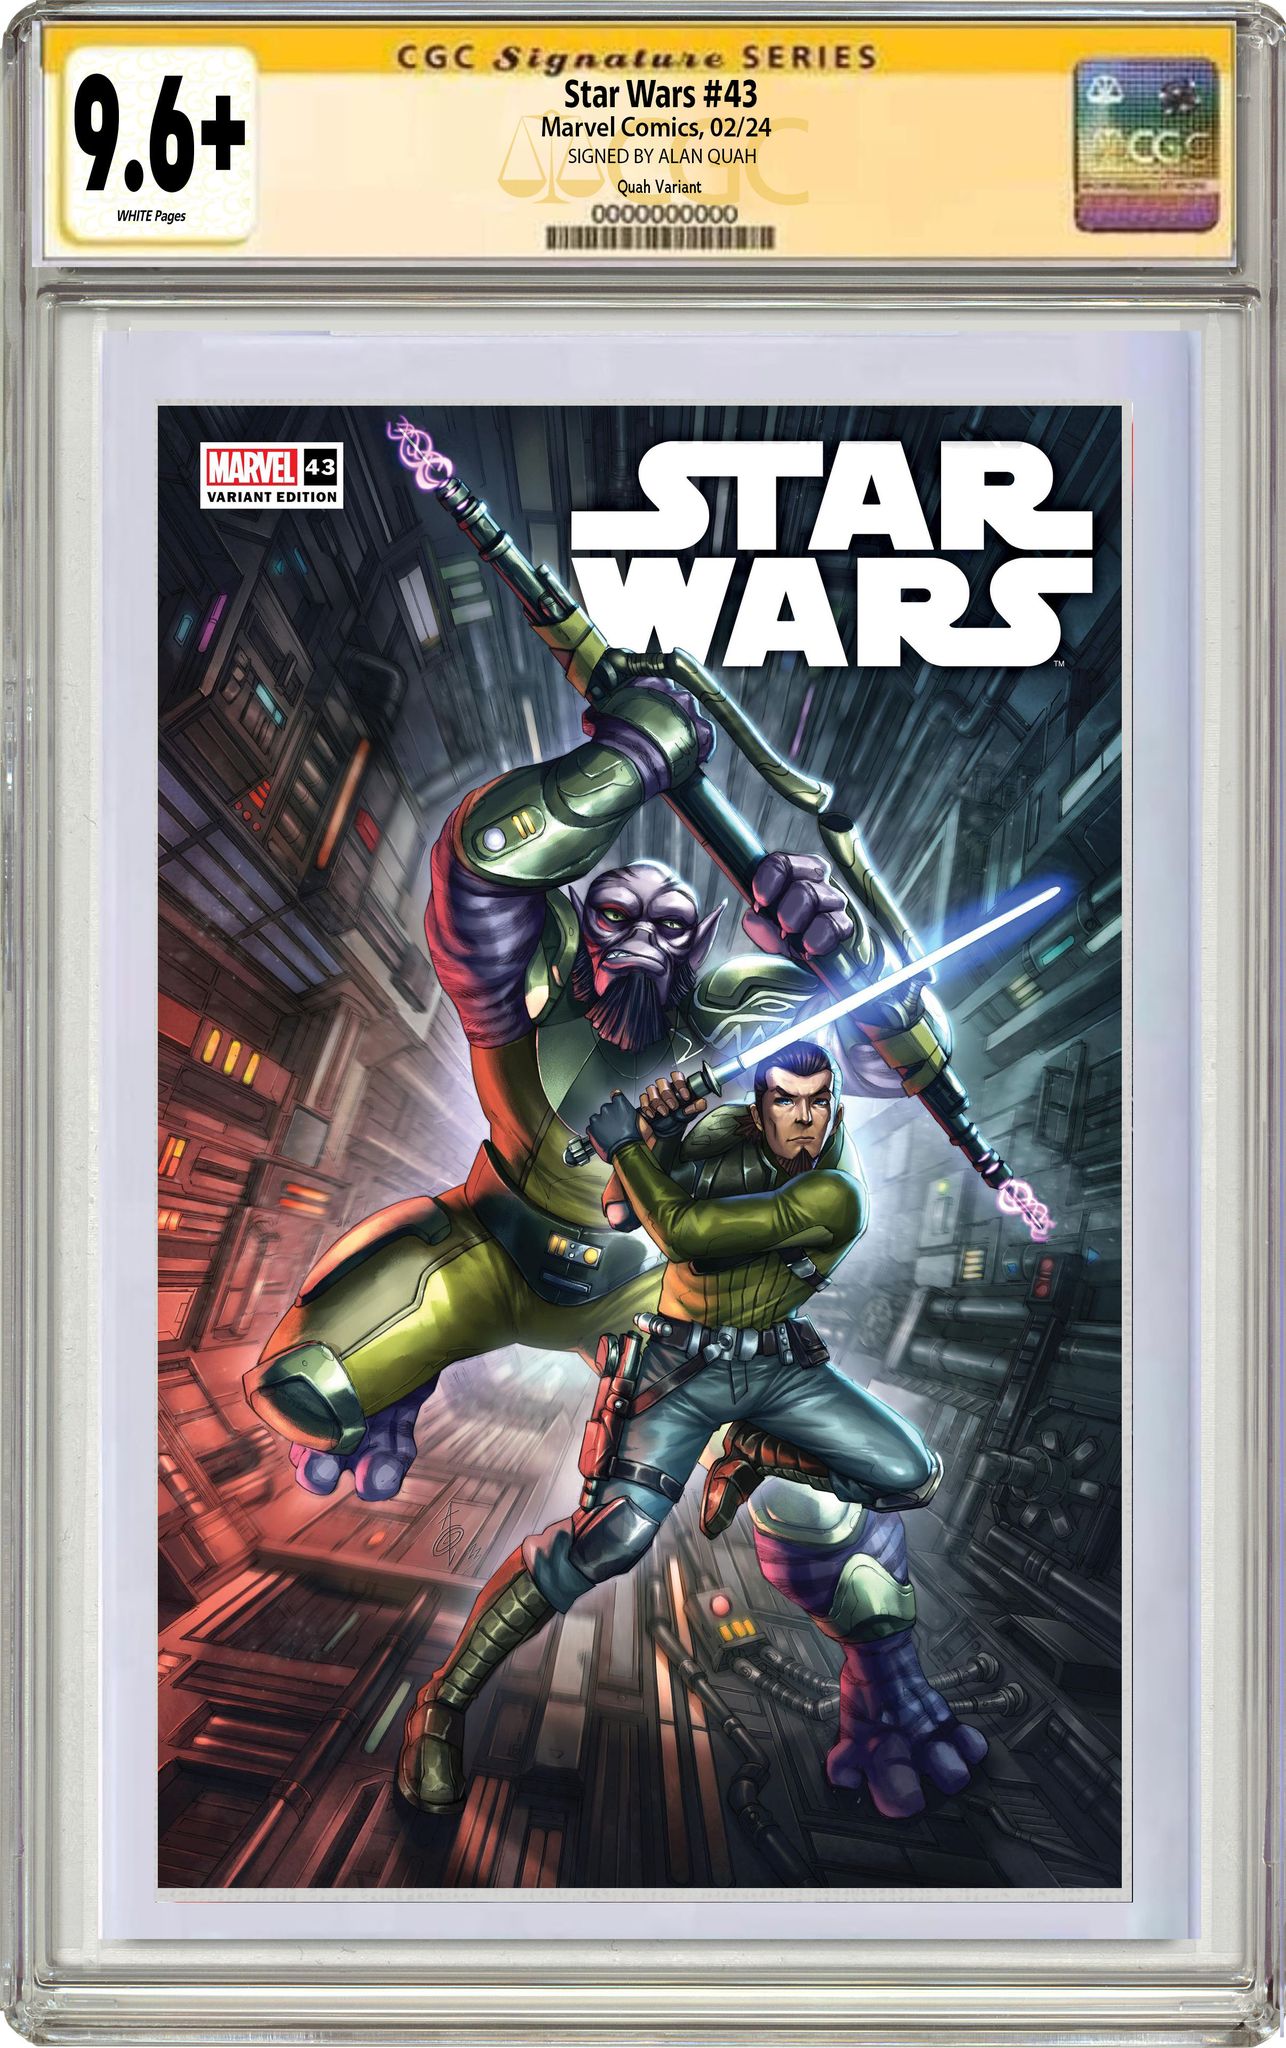 STAR WARS 43 ALAN QUAH REBELS 10TH ANNIVERSARY LIMITED EDITION #2 OF 4 EXCLUSIVE SERIES OPTIONS 02/21/24 (M31)